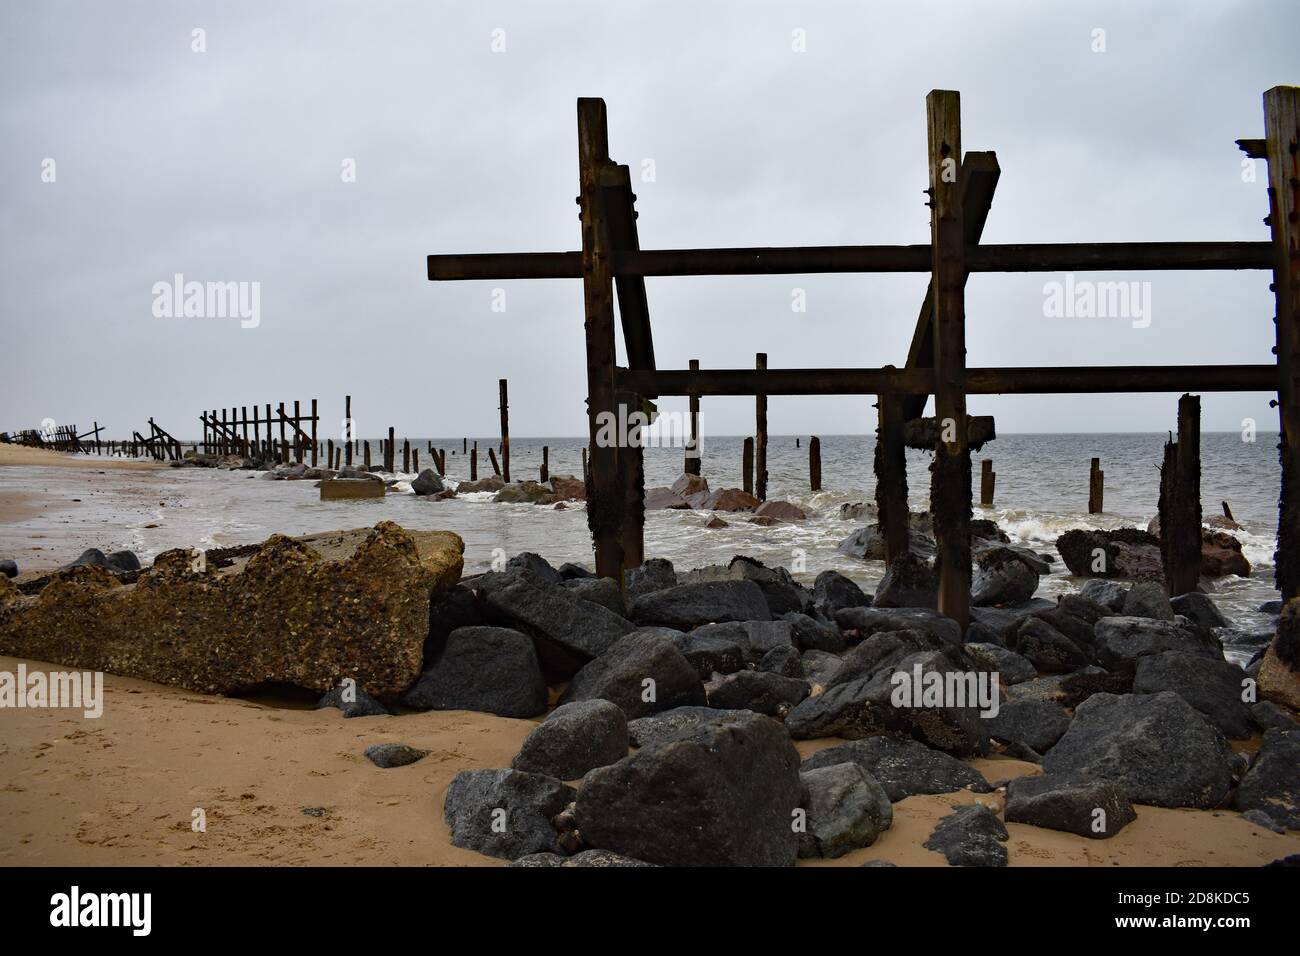 The old wooden sea defences along Happisburgh Beach in Norfolk, UK.  Placed here to prevent further costal erosion from taking place. Stock Photo